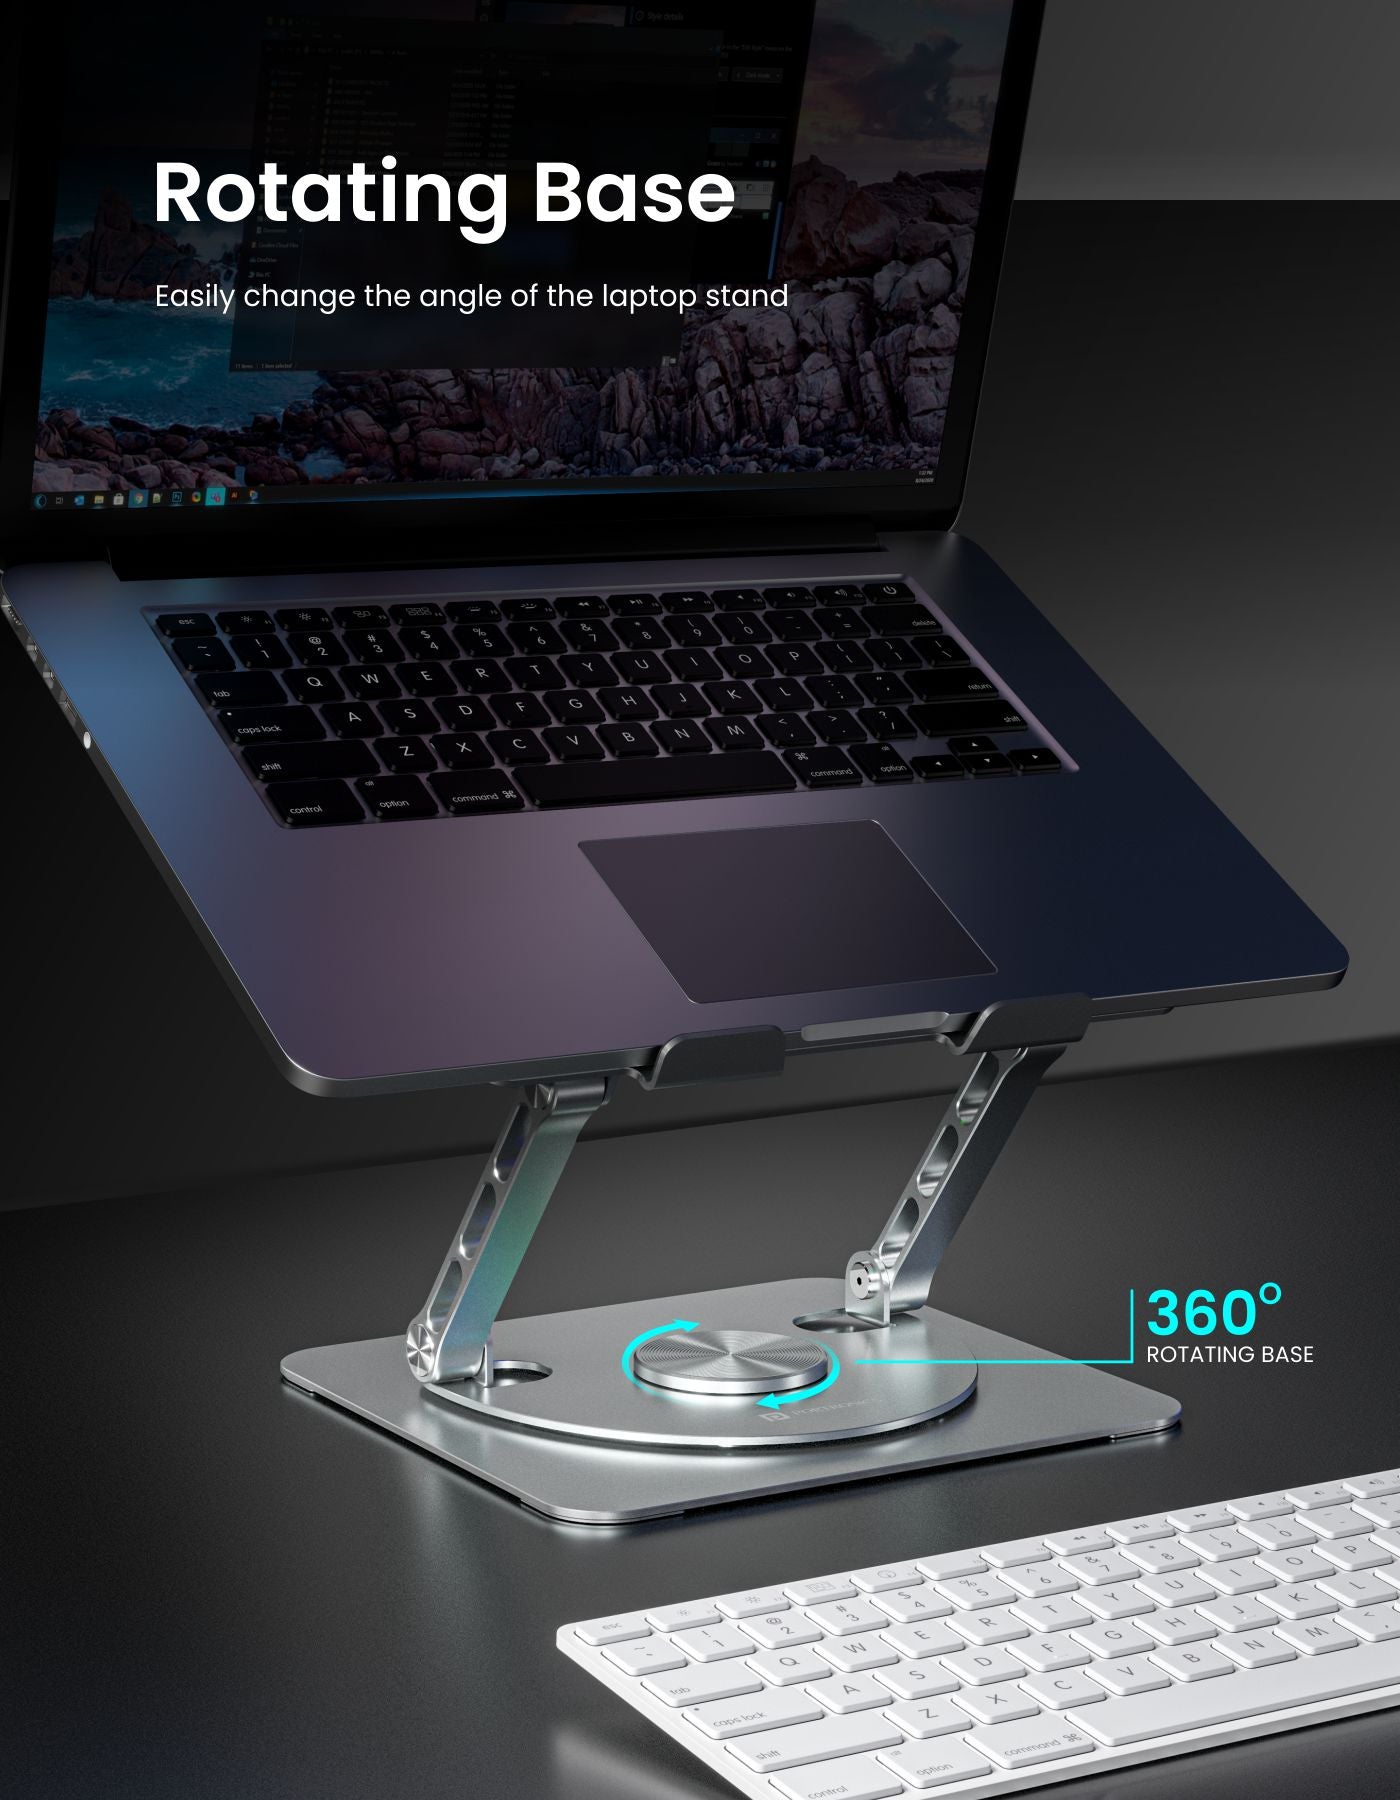 Compatible with up to 17-inch laptops